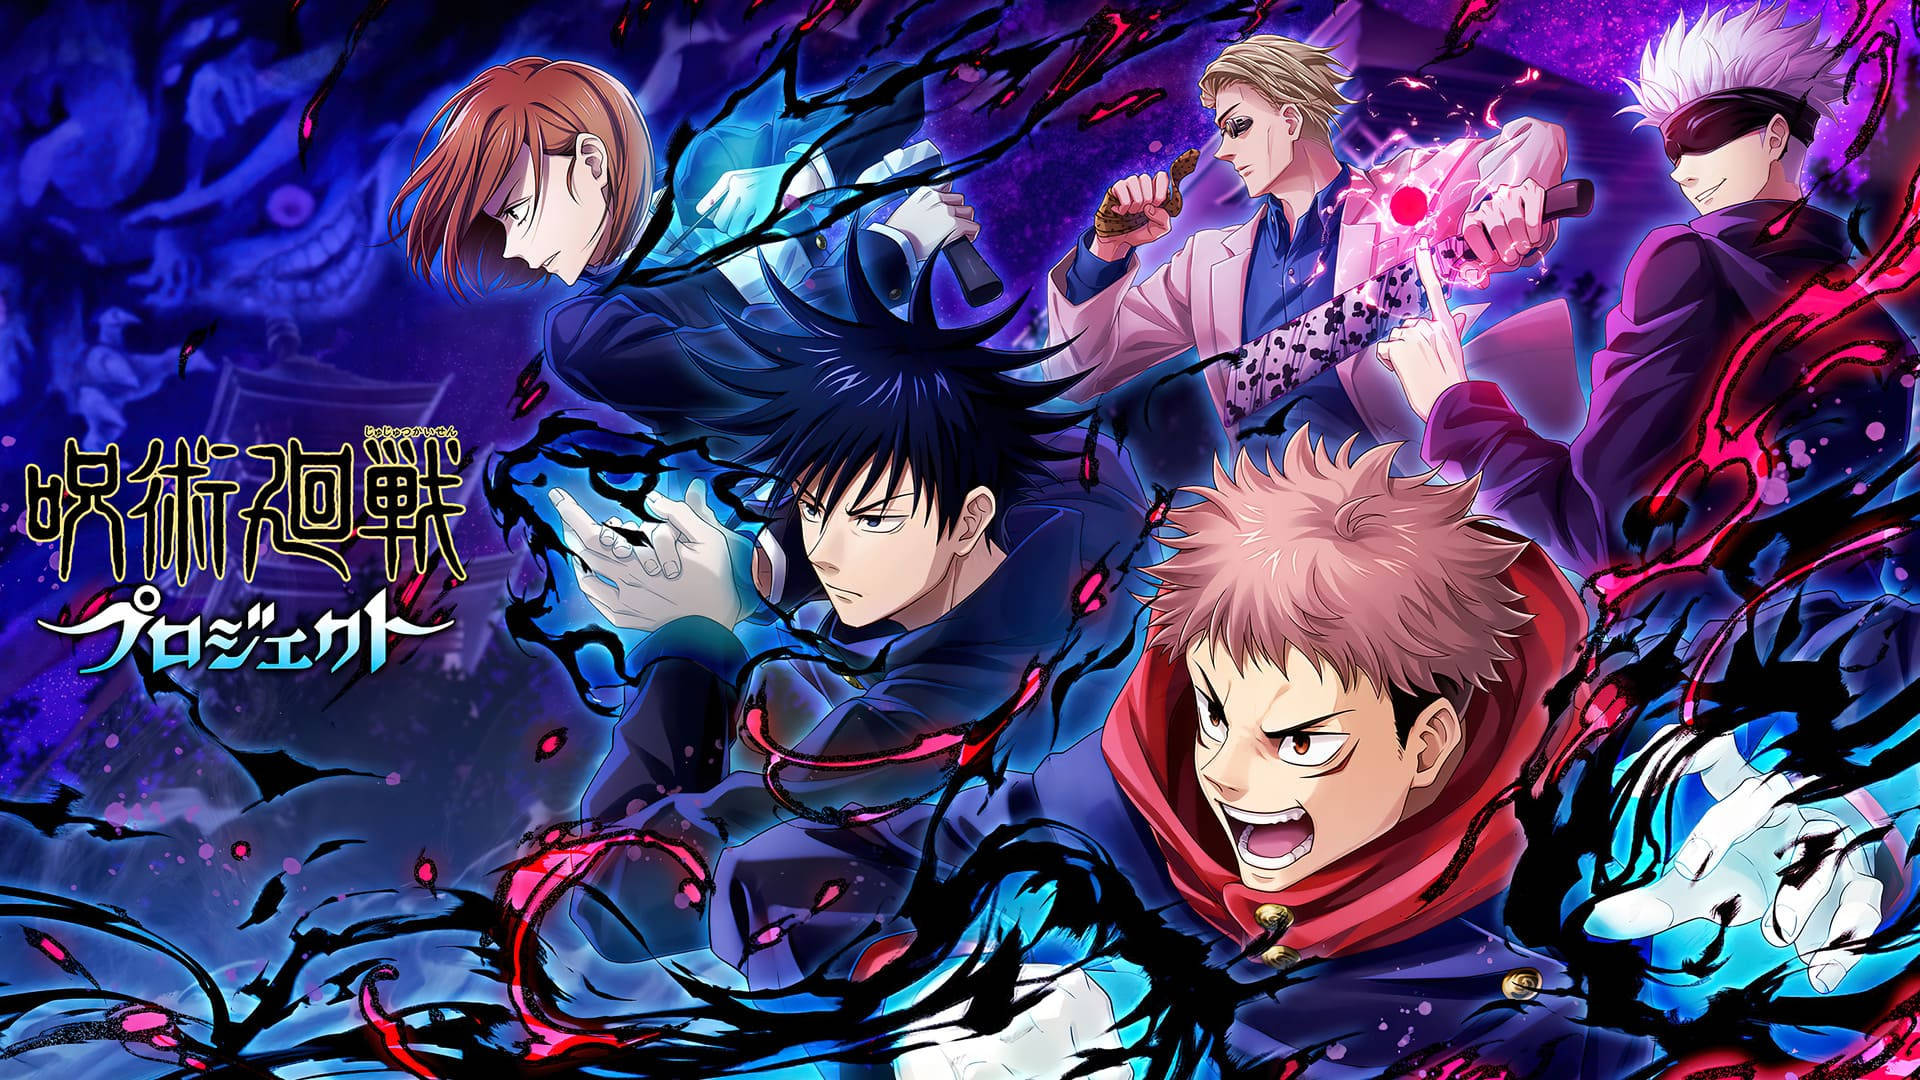 Get the Fight on with Jujutsu Kaisen and His Desktop Wallpaper